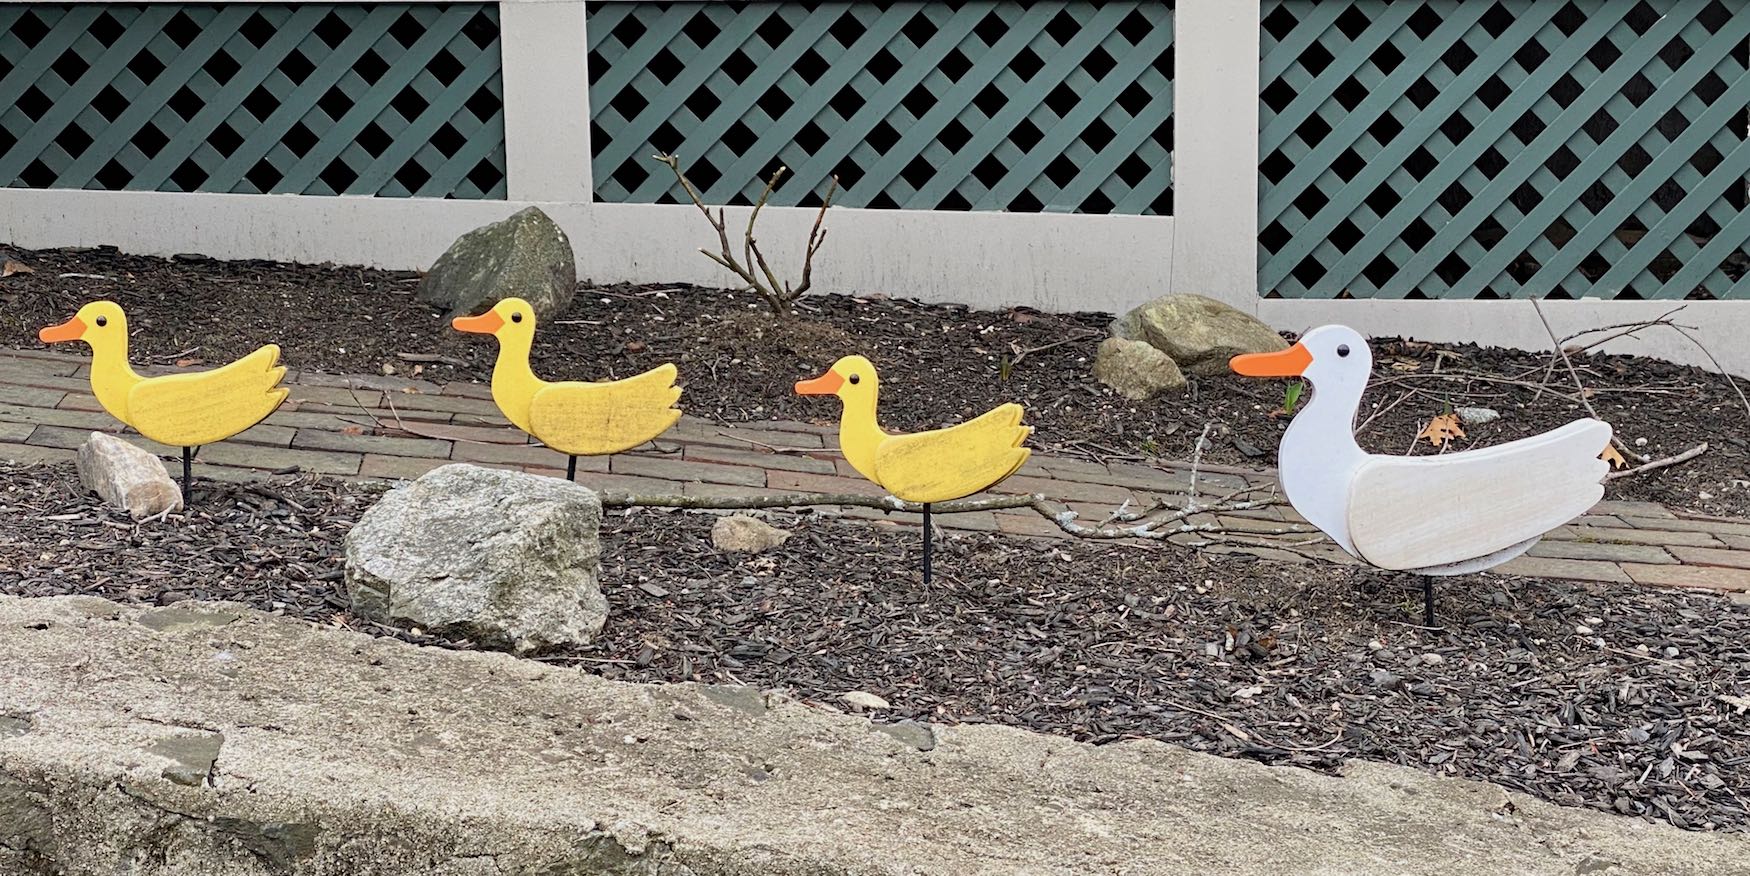 It's the weekend! Number 290, Painted Ducks in a Front Yard